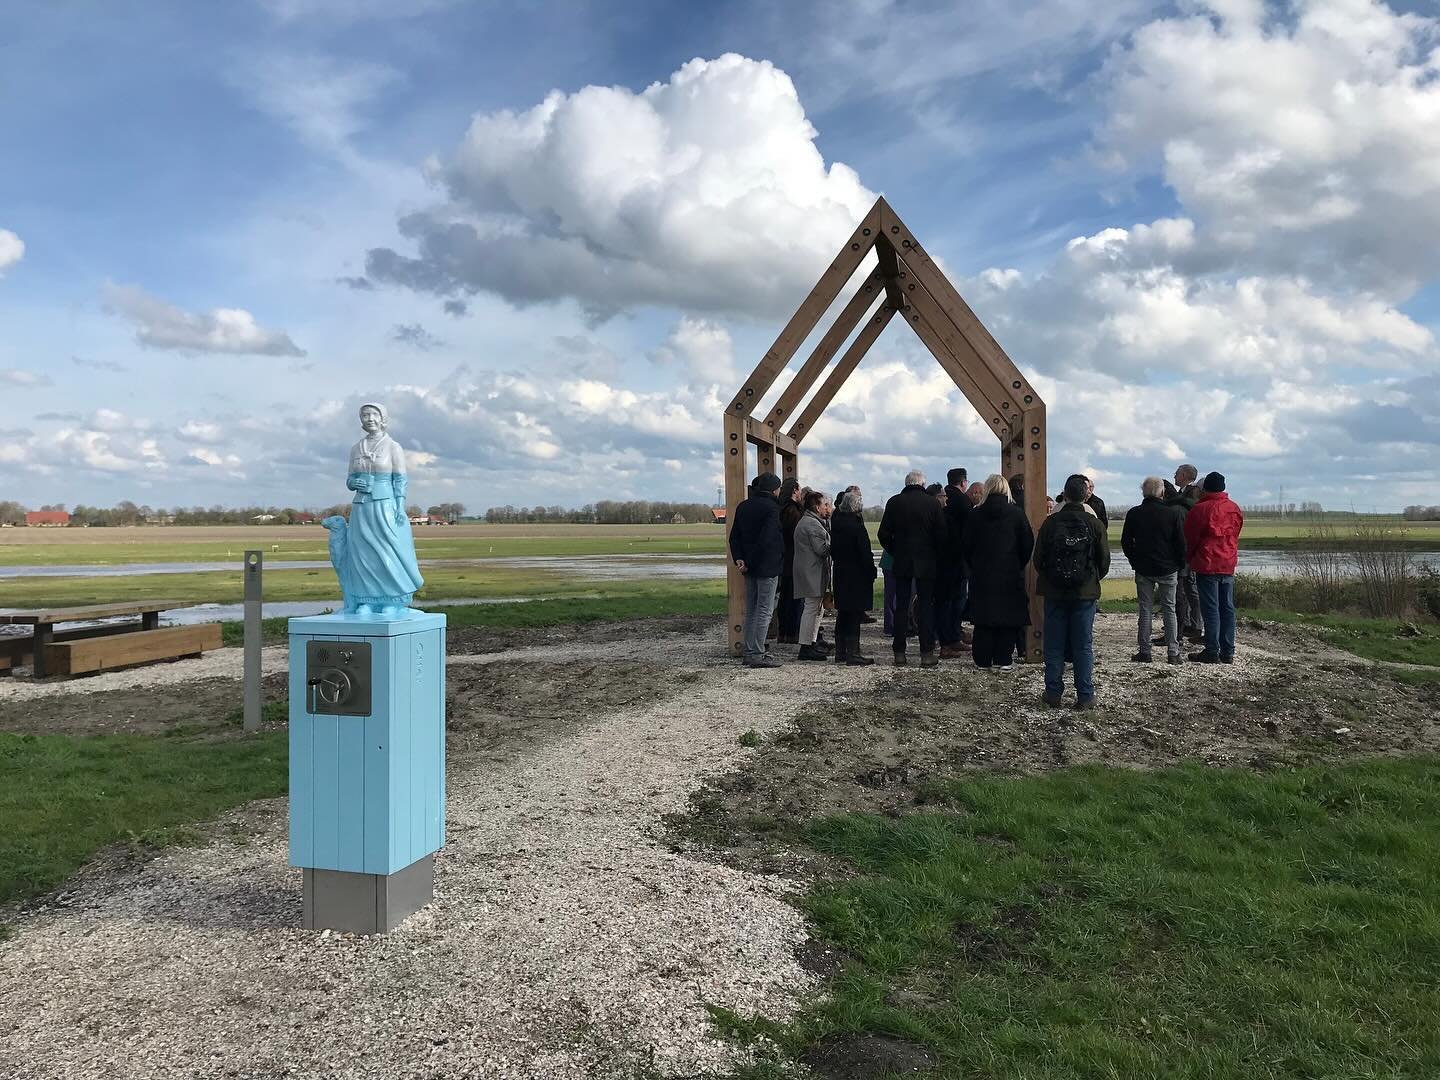 The newest addition to @schokland_werelderfgoed is up and running this spring! &nbsp;

The walking tour, designed by @kinkorn_design, now features statues of important characters in the island&rsquo;s history alongside audio stories and information a